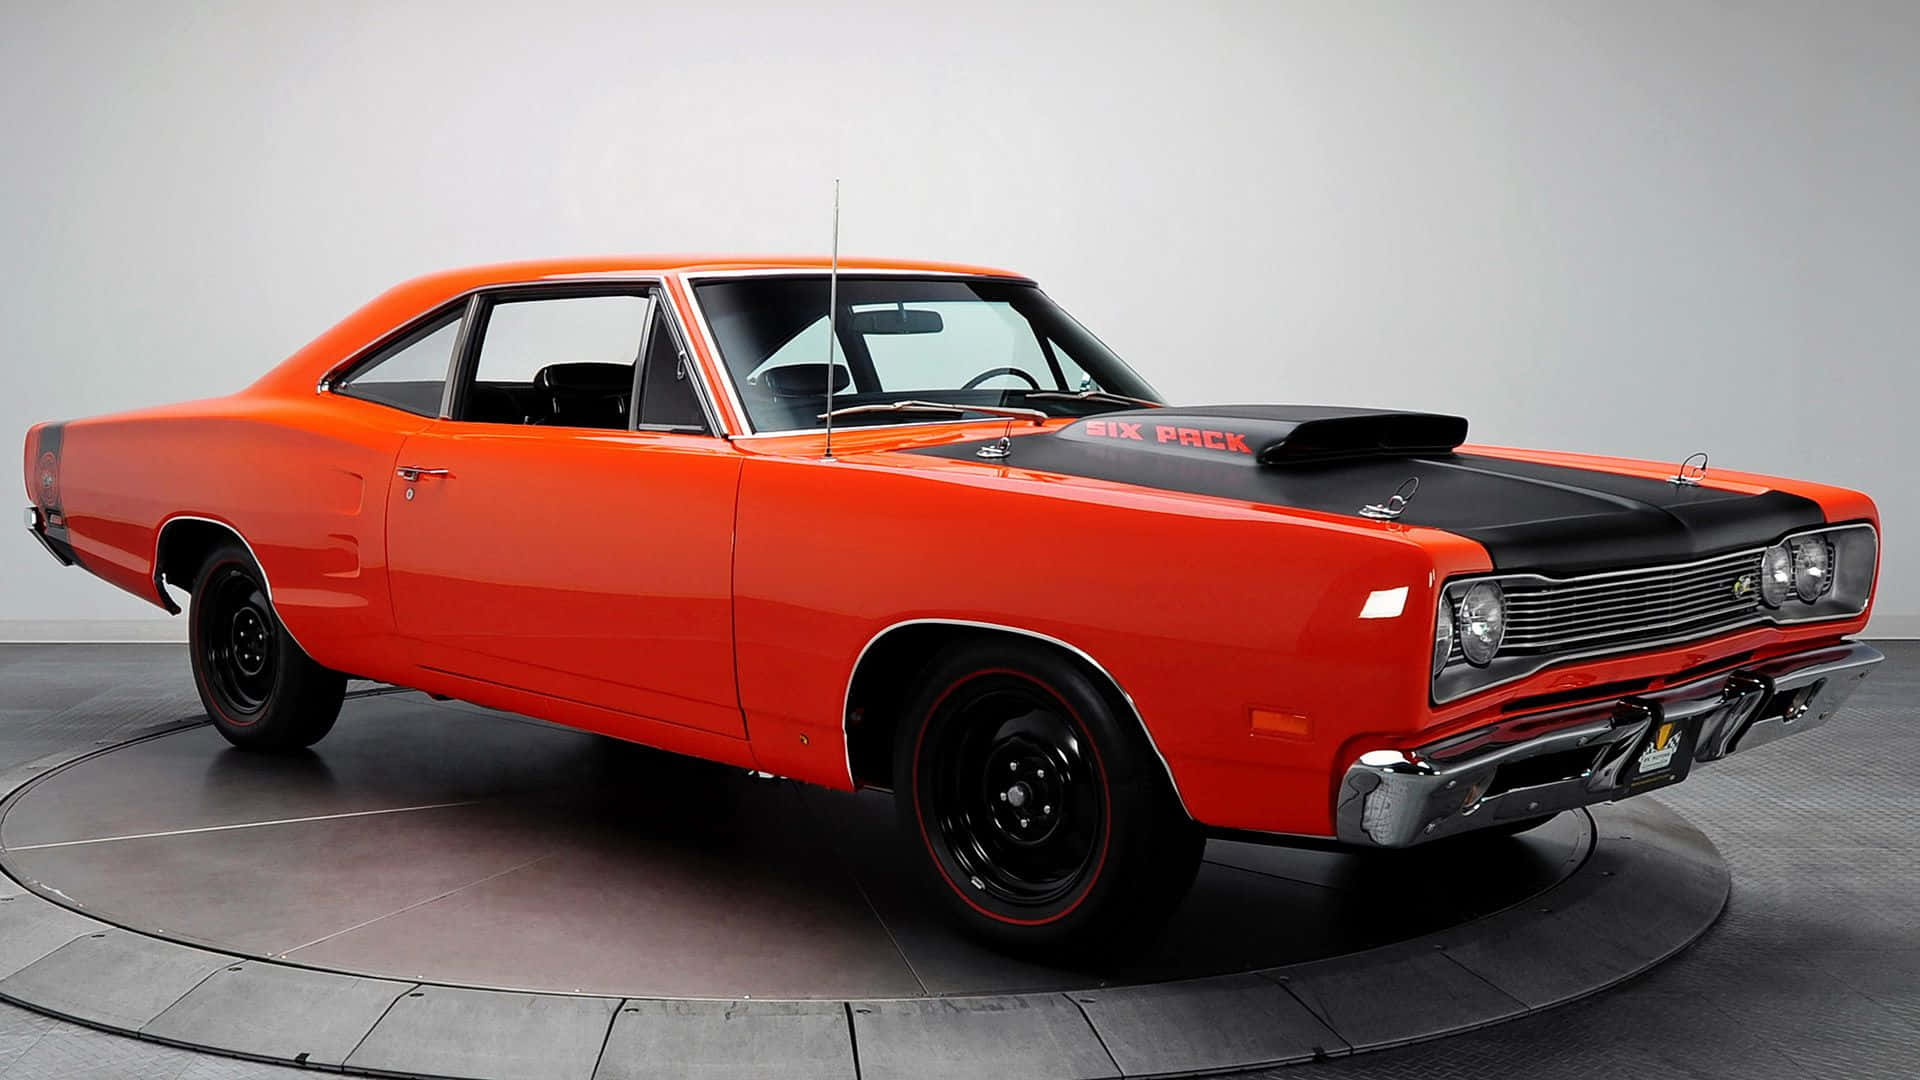 Caption: Power And Grace: A Stunning Dodge Super Bee Wallpaper